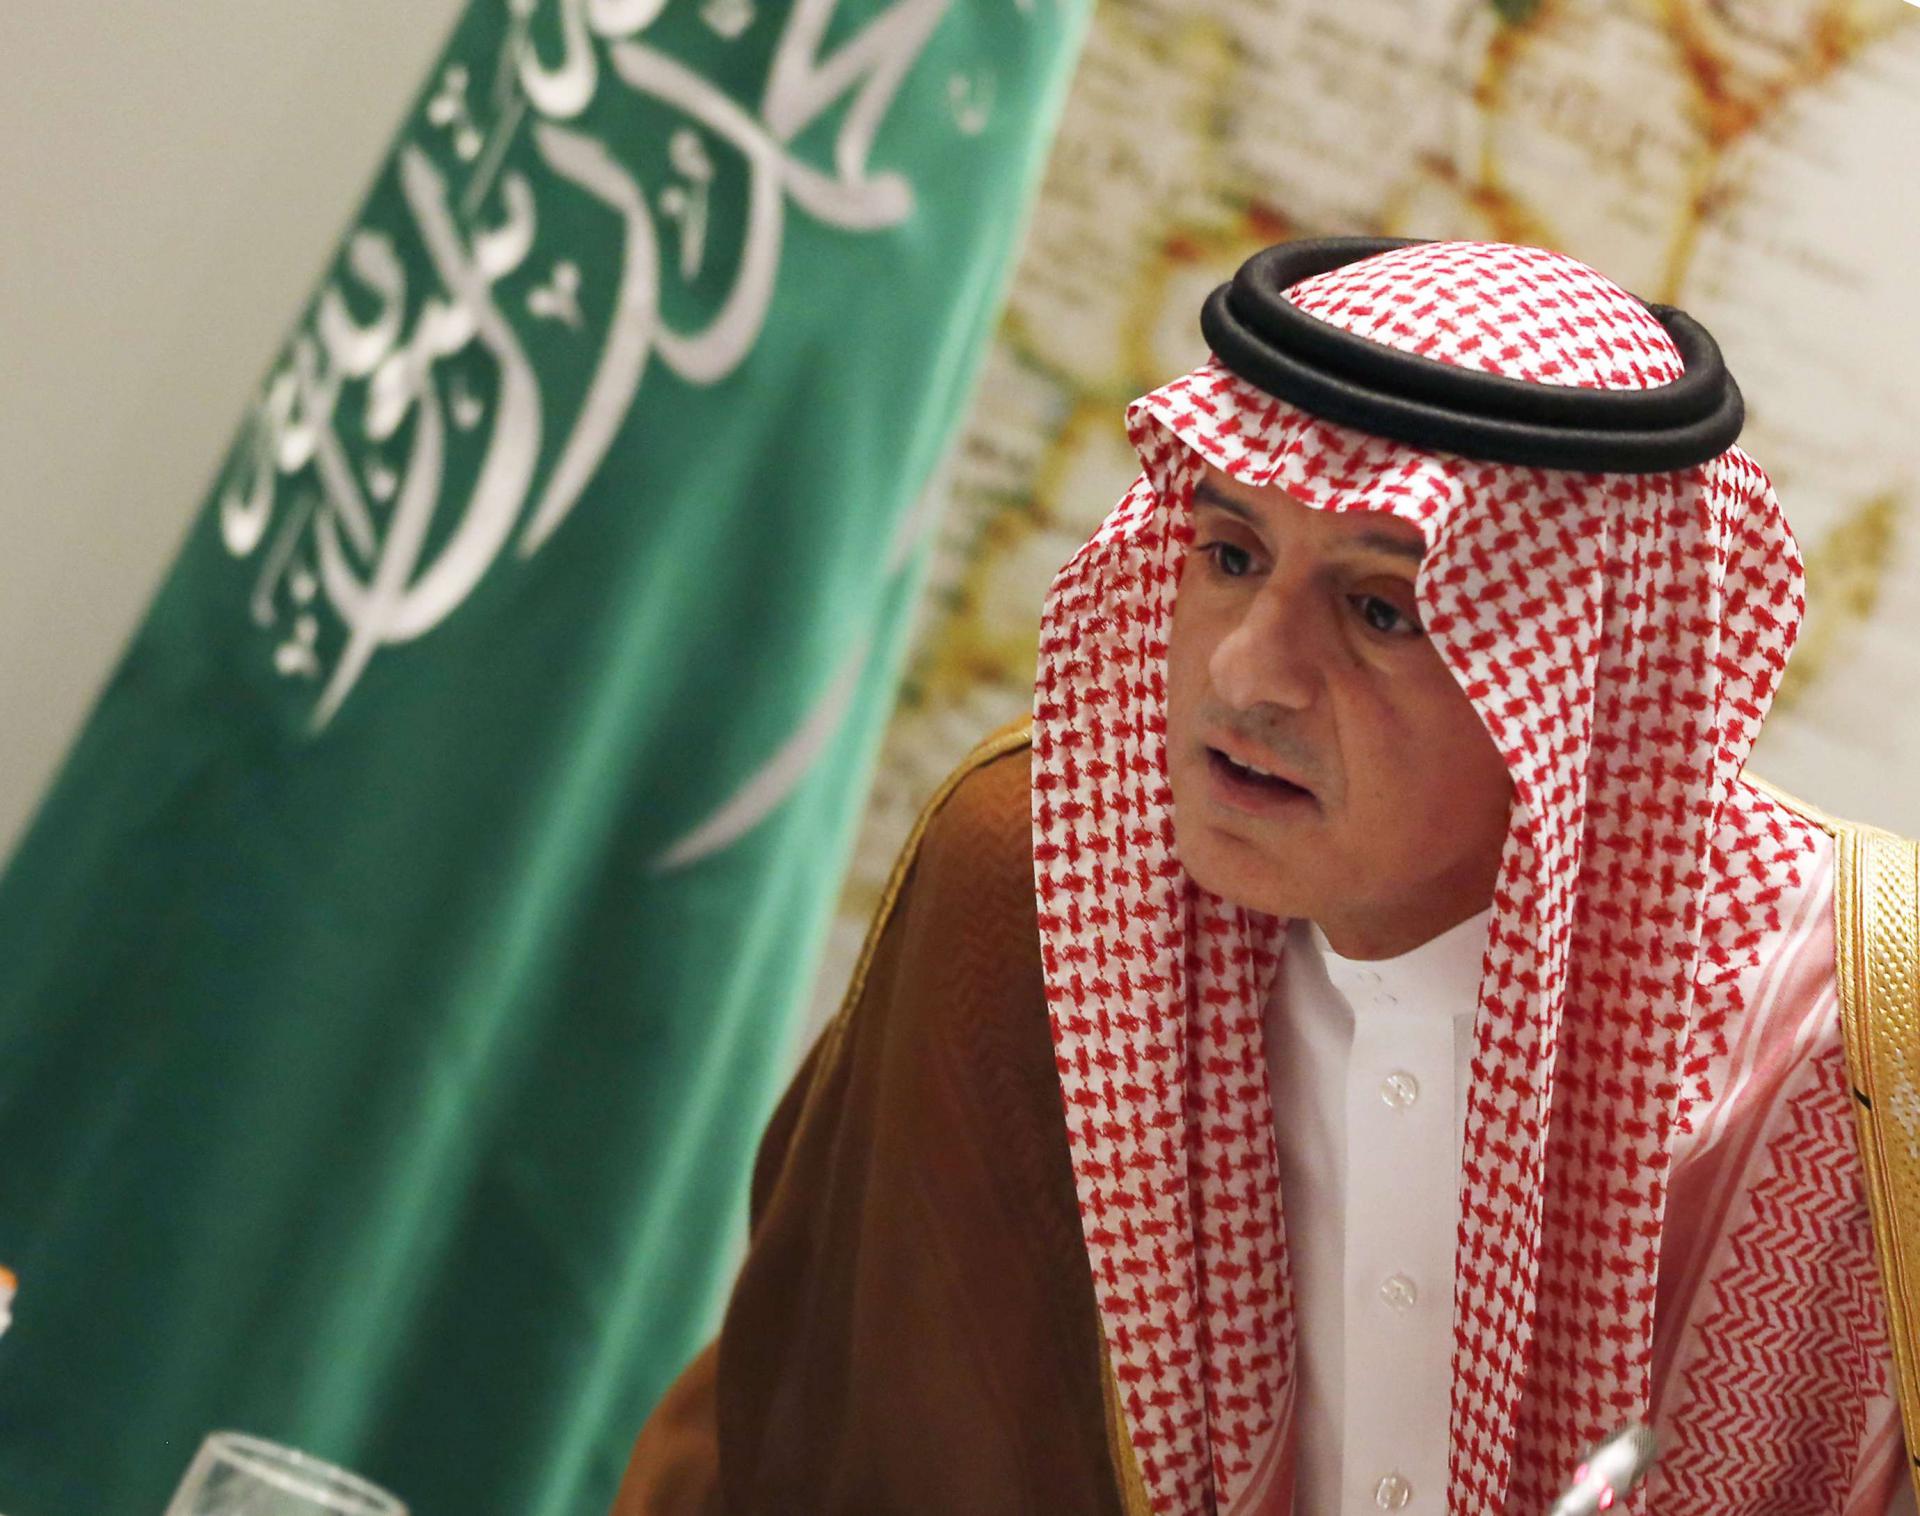 "We are certain that the launch did not come from Yemen, it came from the north," Jubeir said